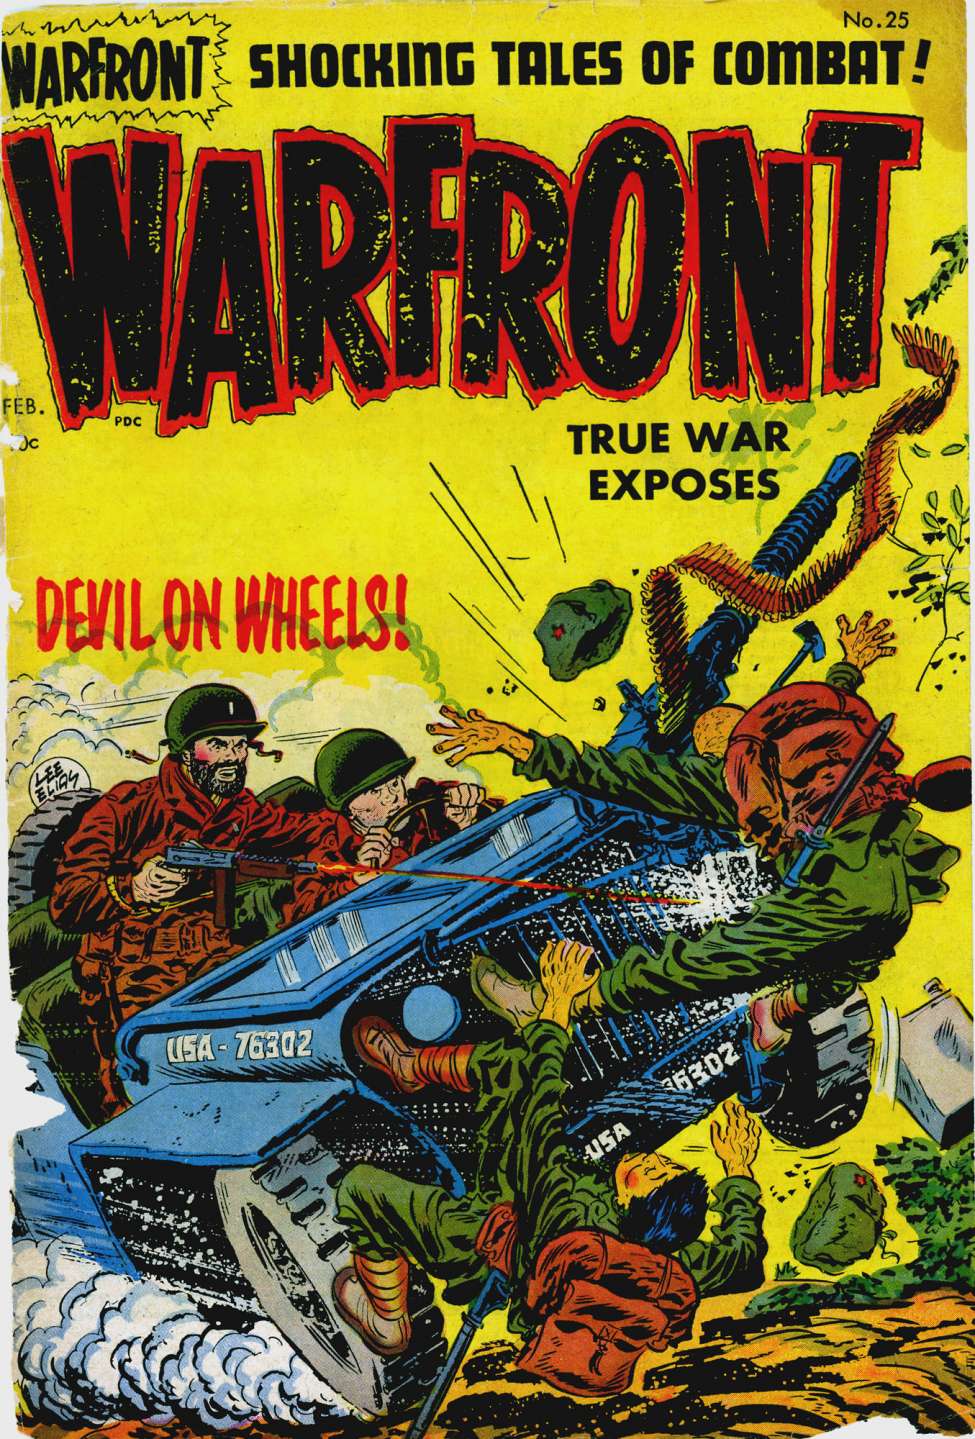 Comic Book Cover For Warfront 25 - Version 1